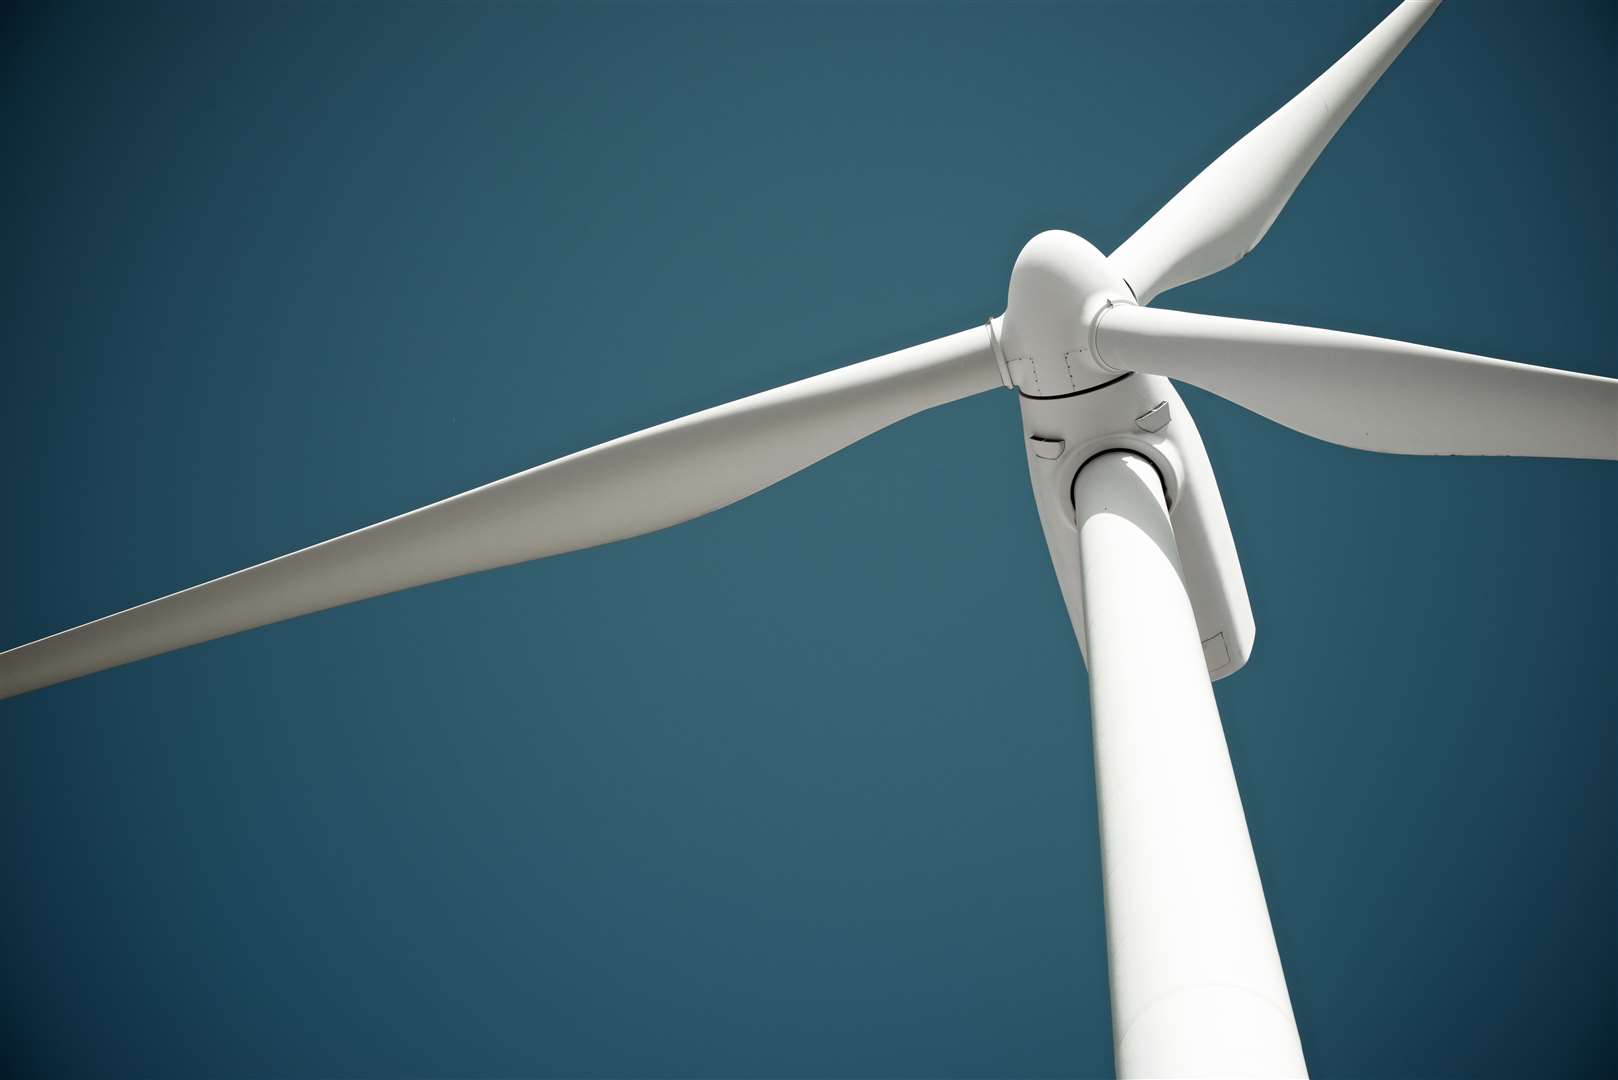 A virtual exhibition is taking place on plans for more turbines at Bhlaraidh wind farm.